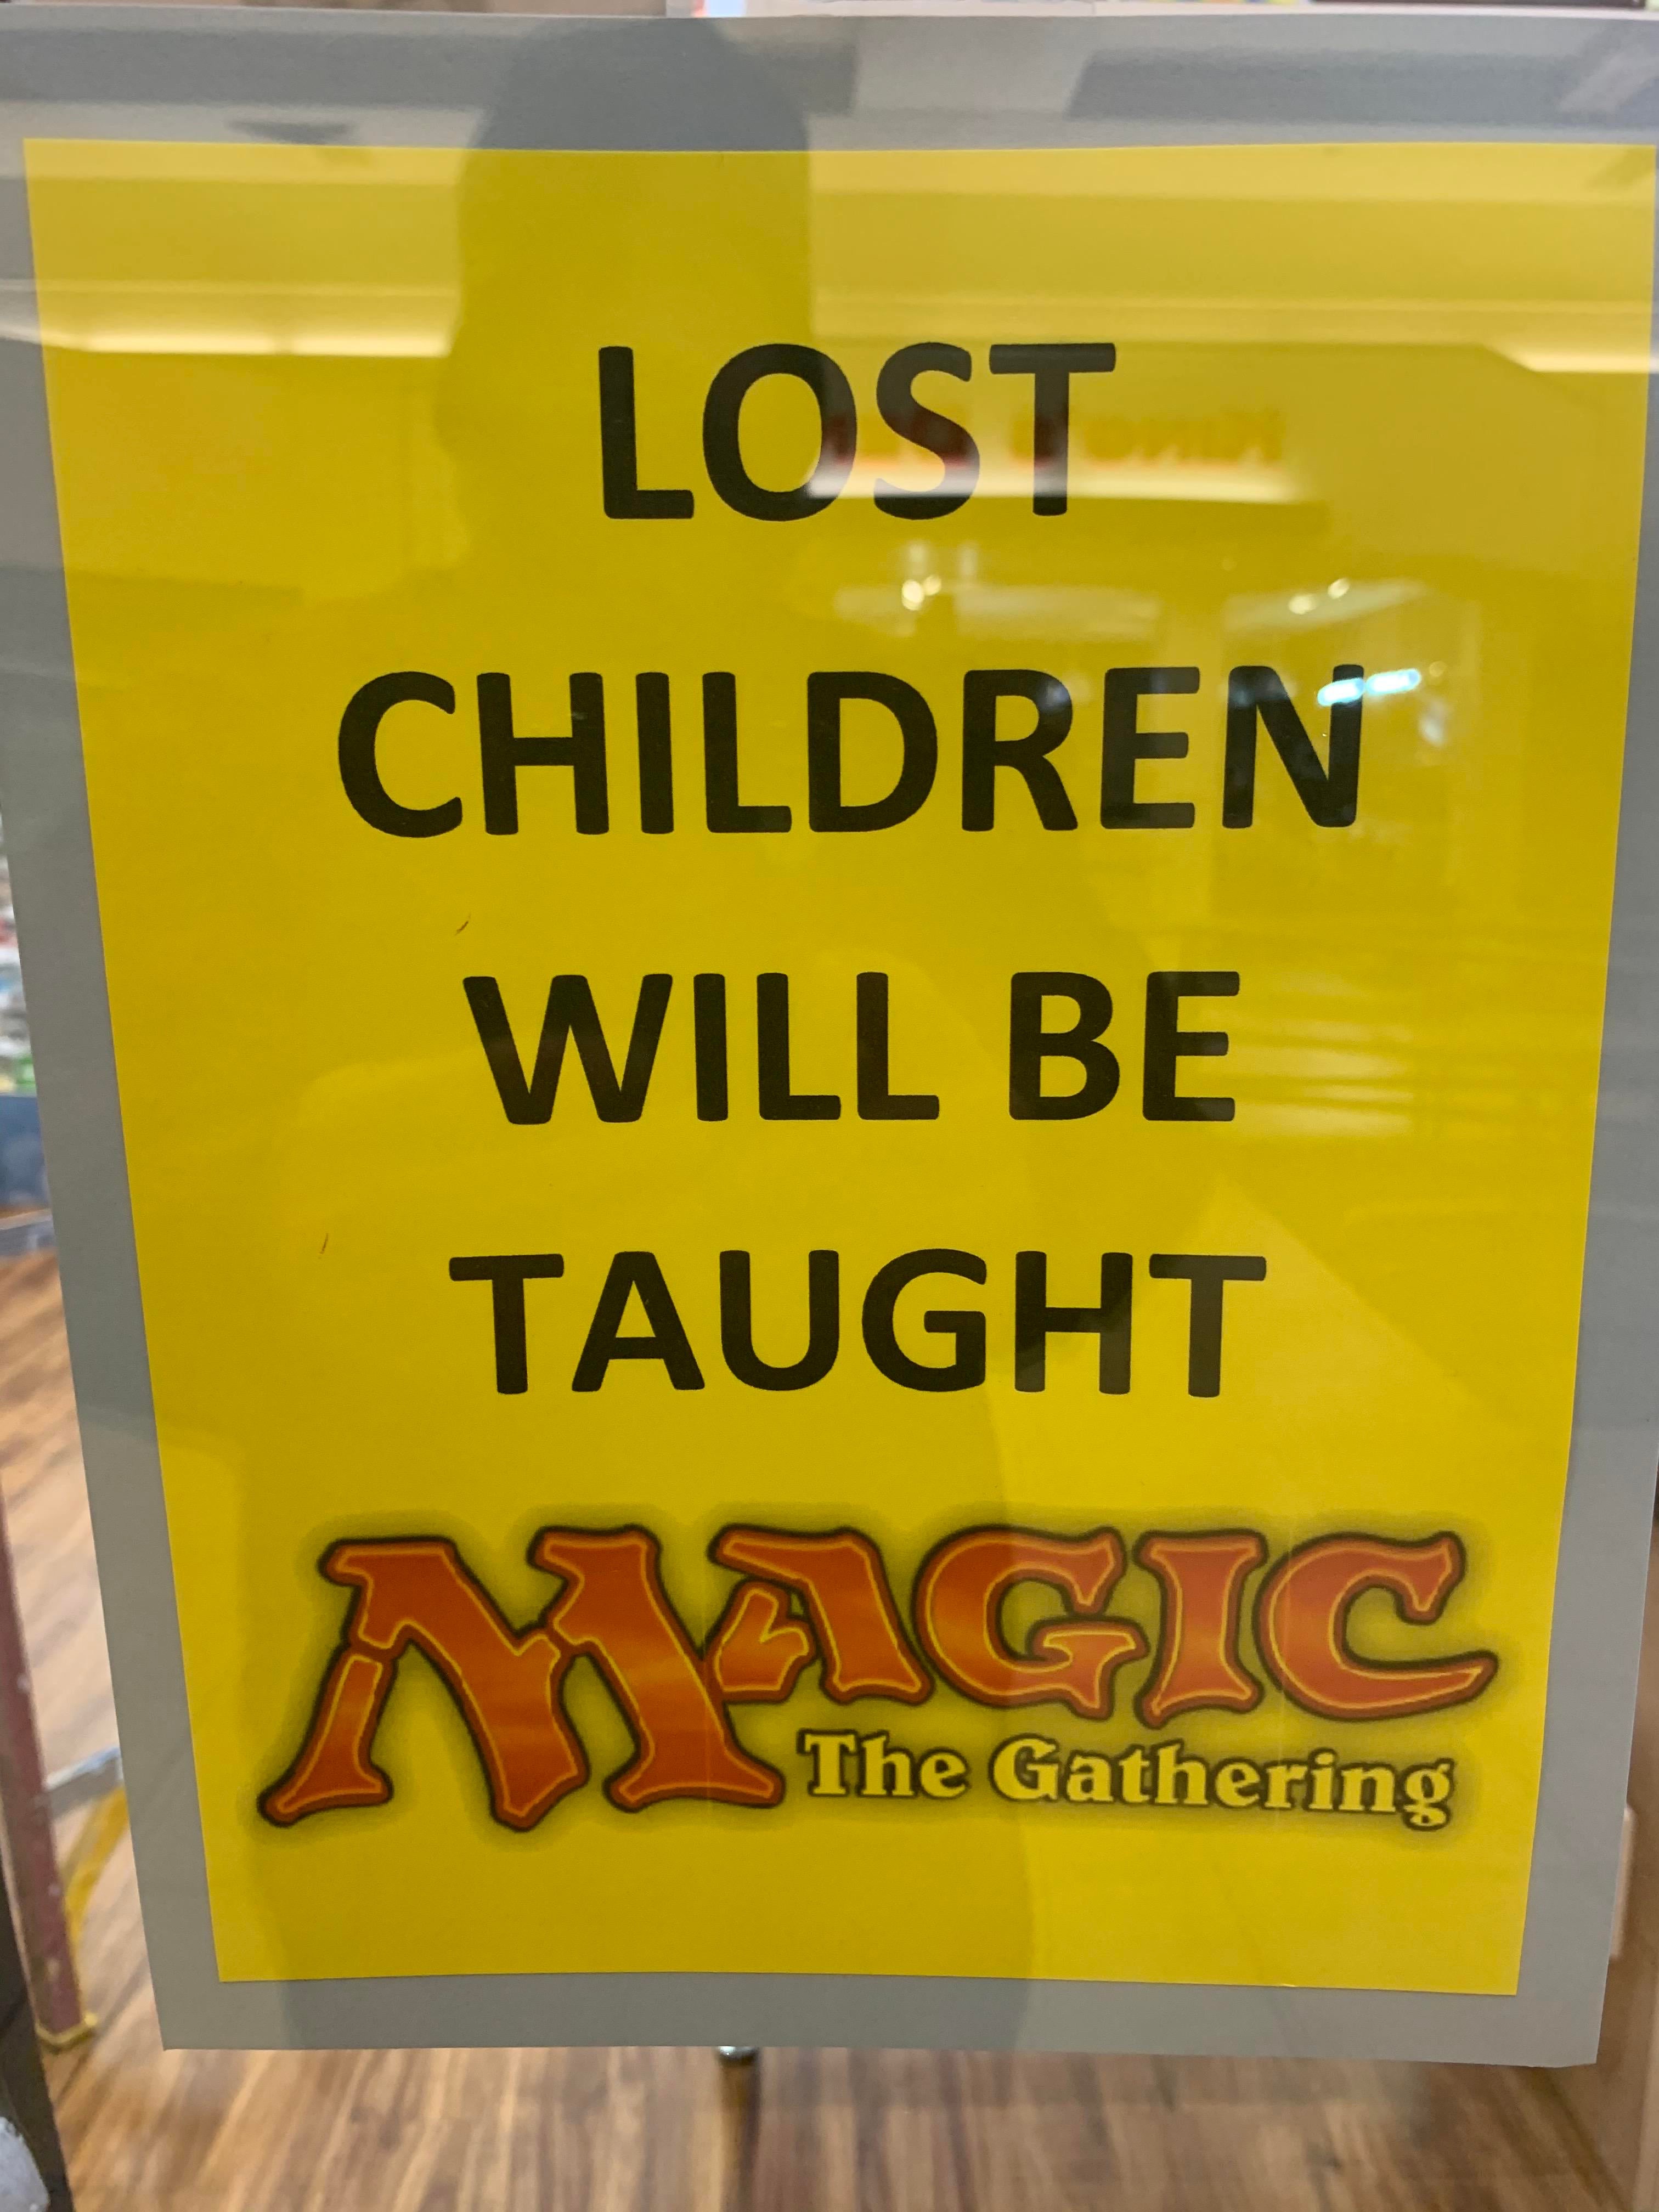 lost children will be taught magic the gathering - Lost Children Will Be Taught Fagic The Gathering